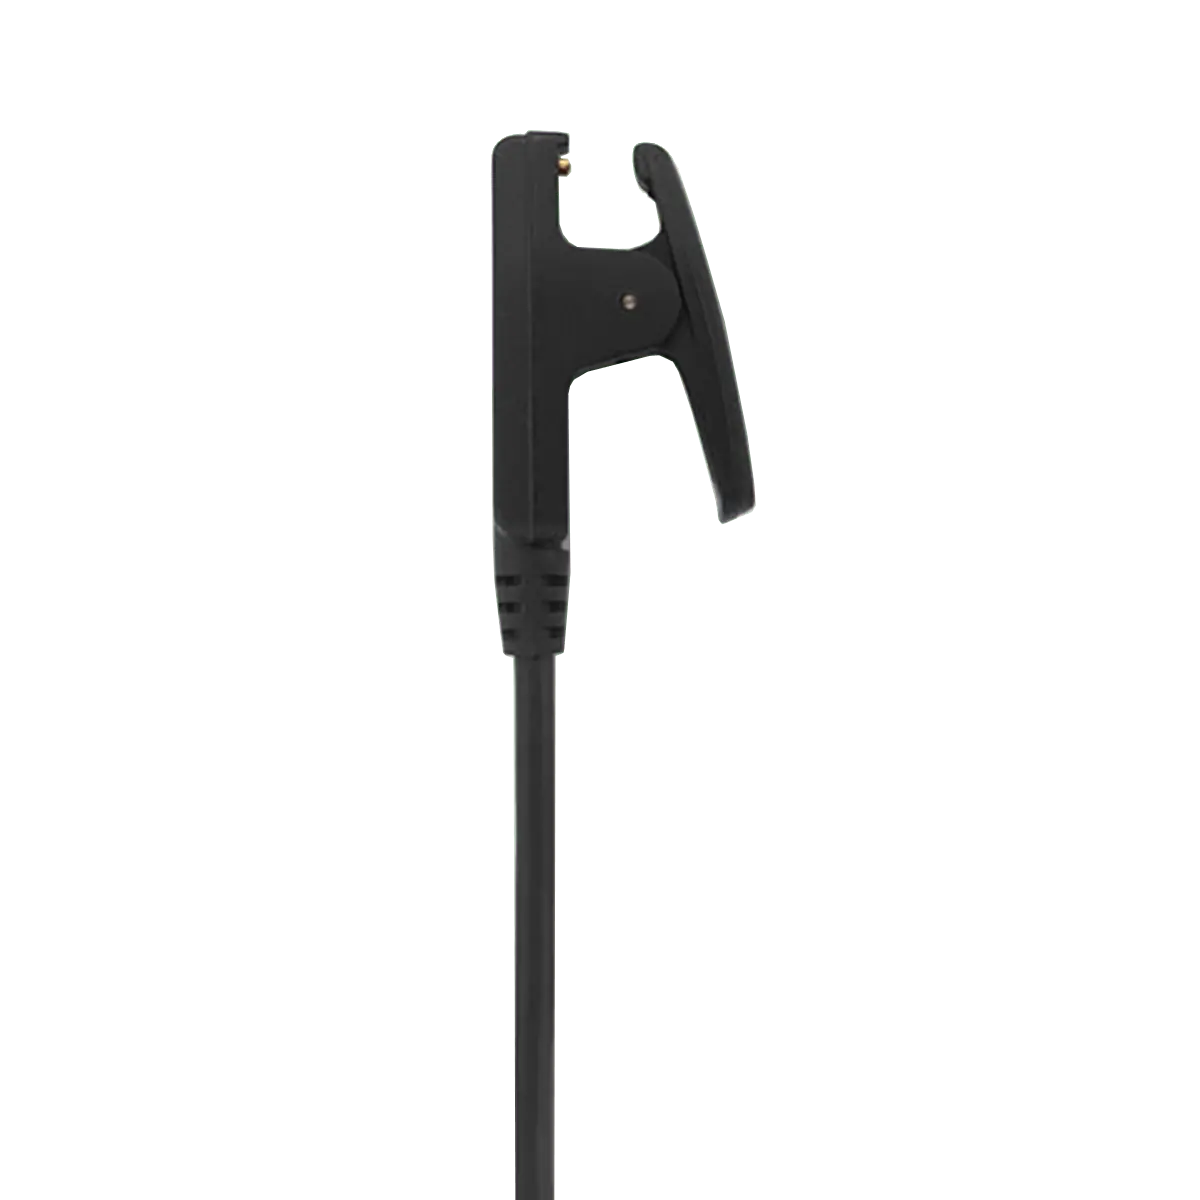 Charging Clip For Multiple Garmin Devices